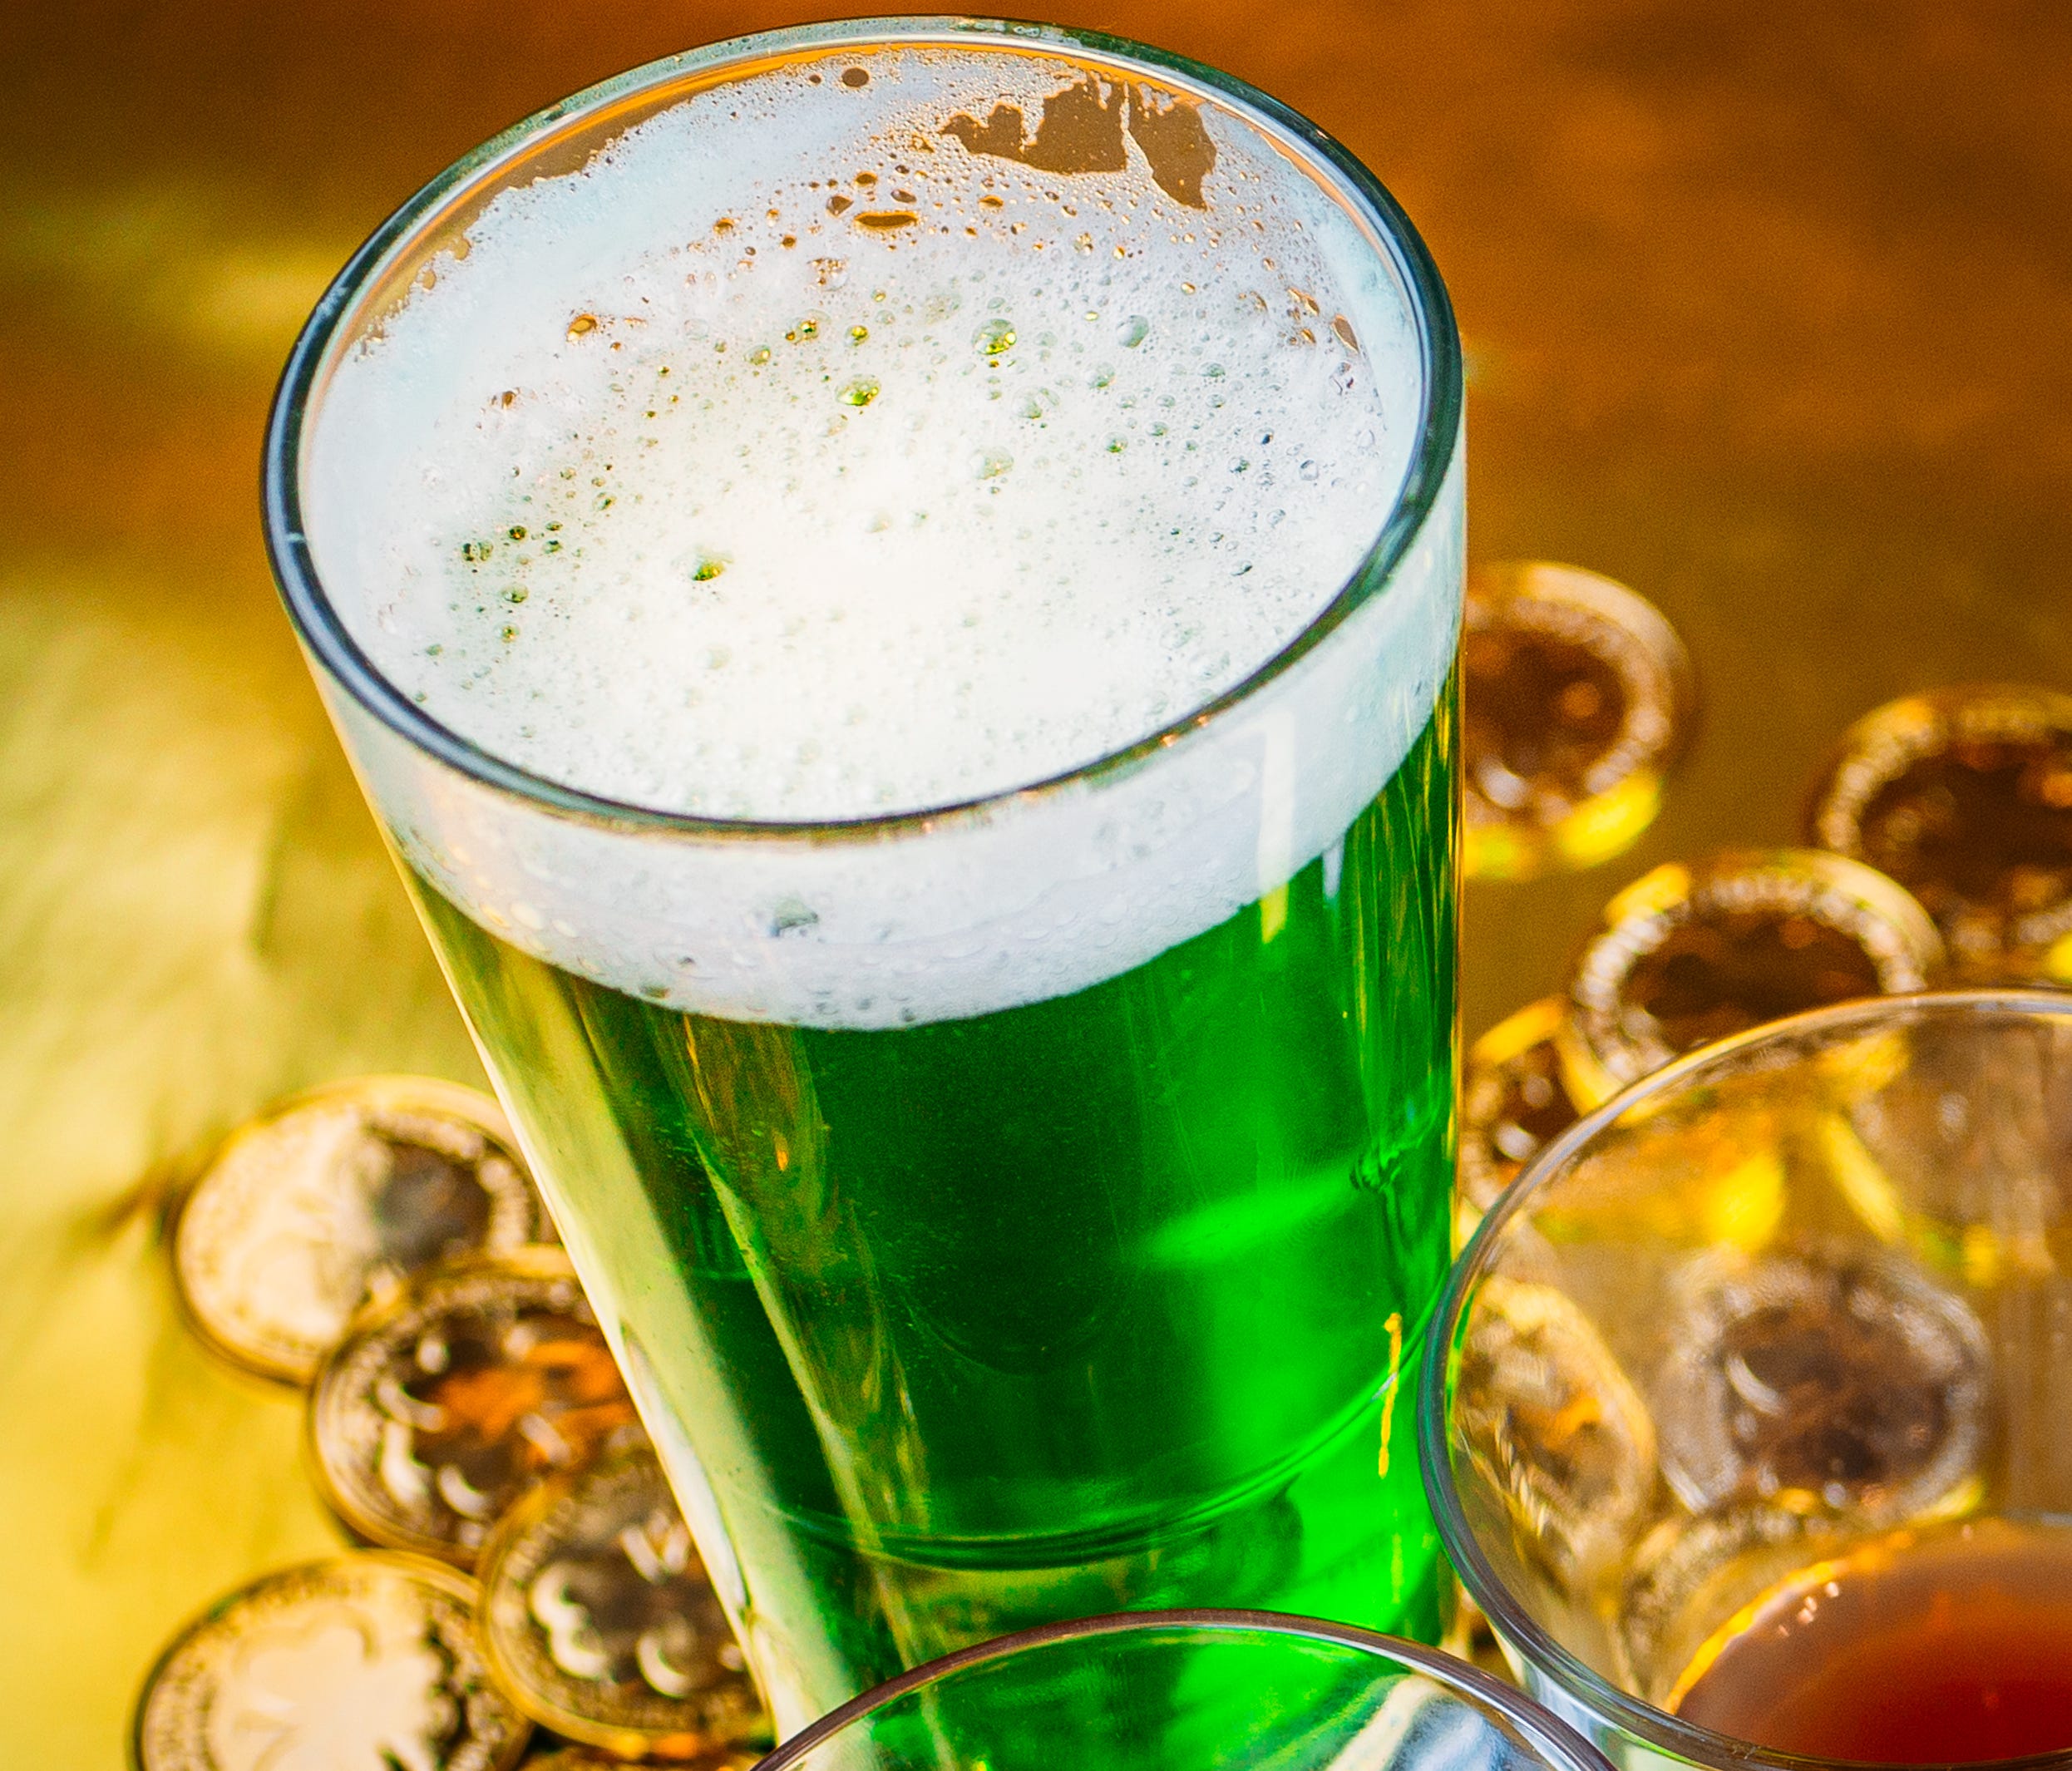 TGI Fridays will have green beer on tap and special drinks March 15-18.